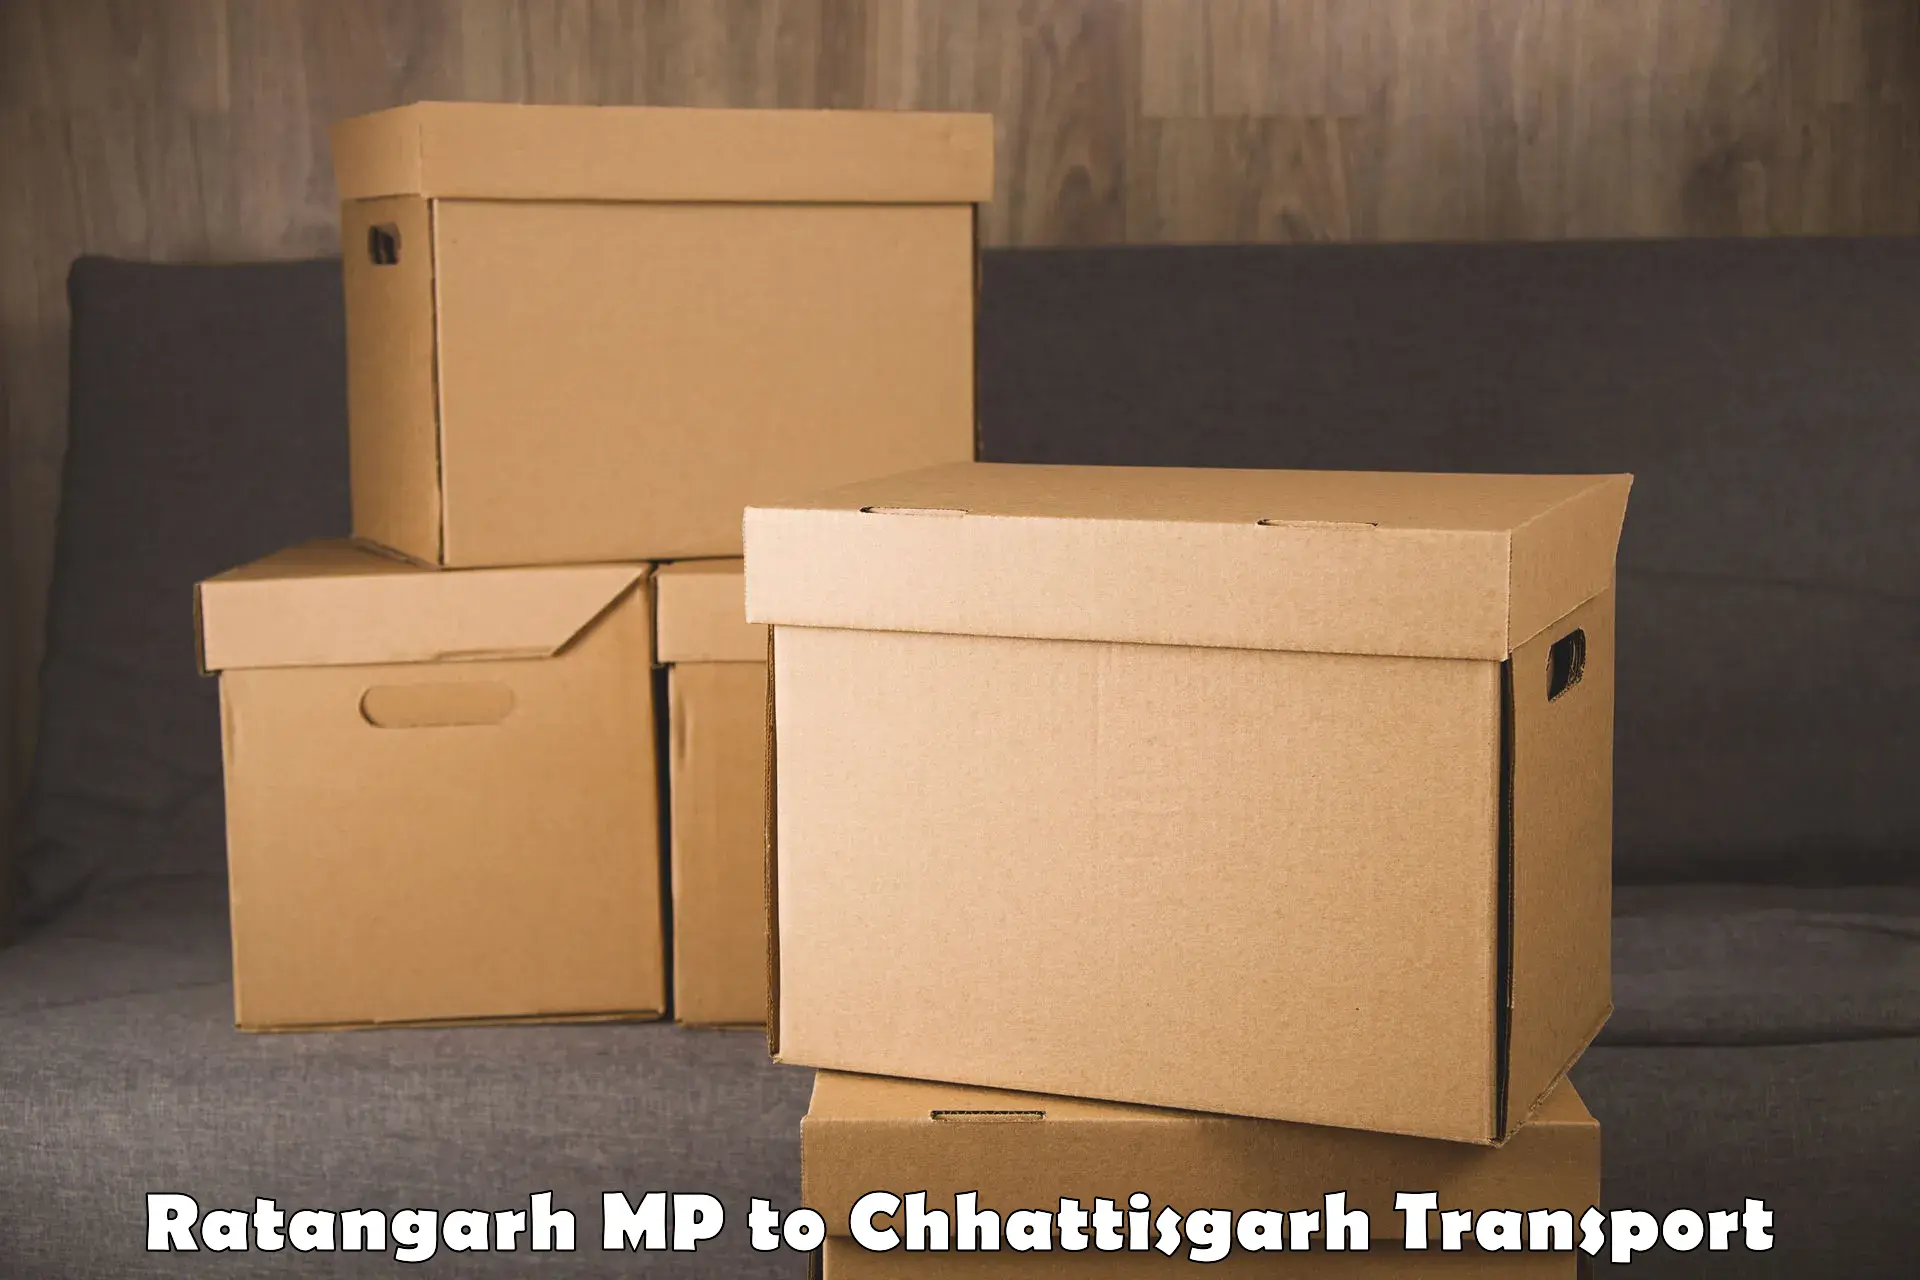 Daily transport service in Ratangarh MP to Raipur